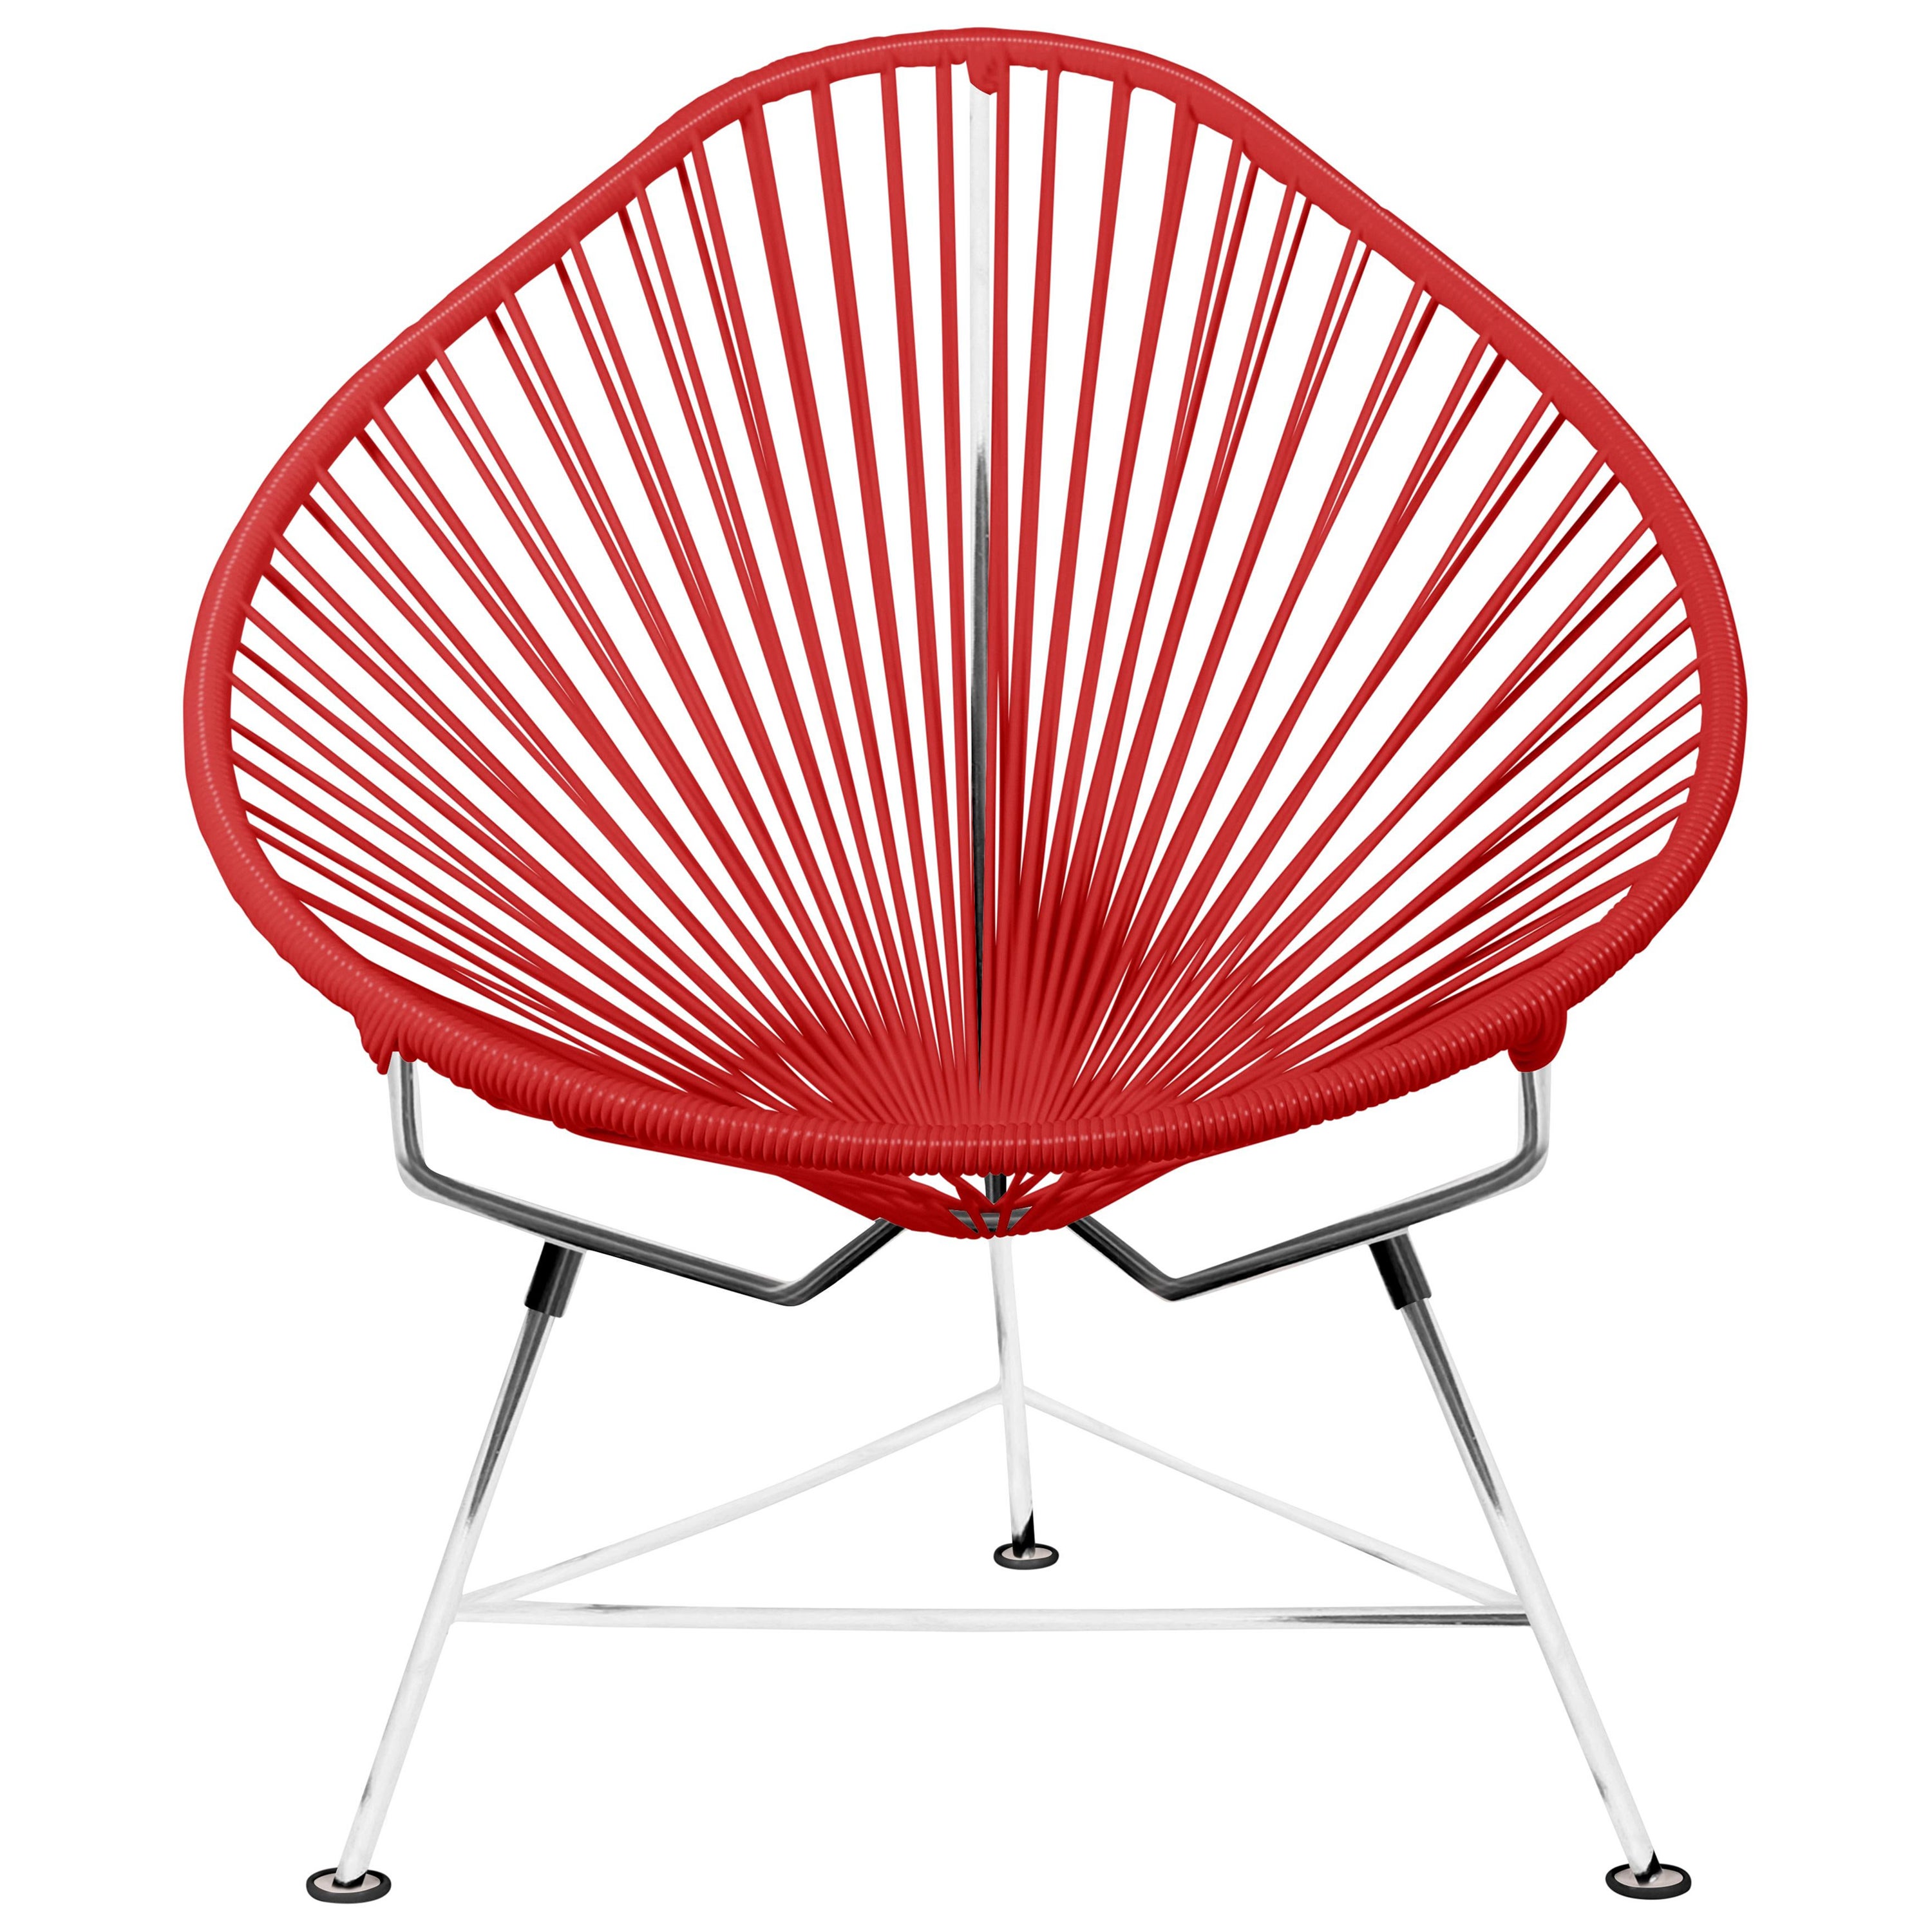 Innit Designs Acapulco Chair Red Weave on Chrome Frame For Sale